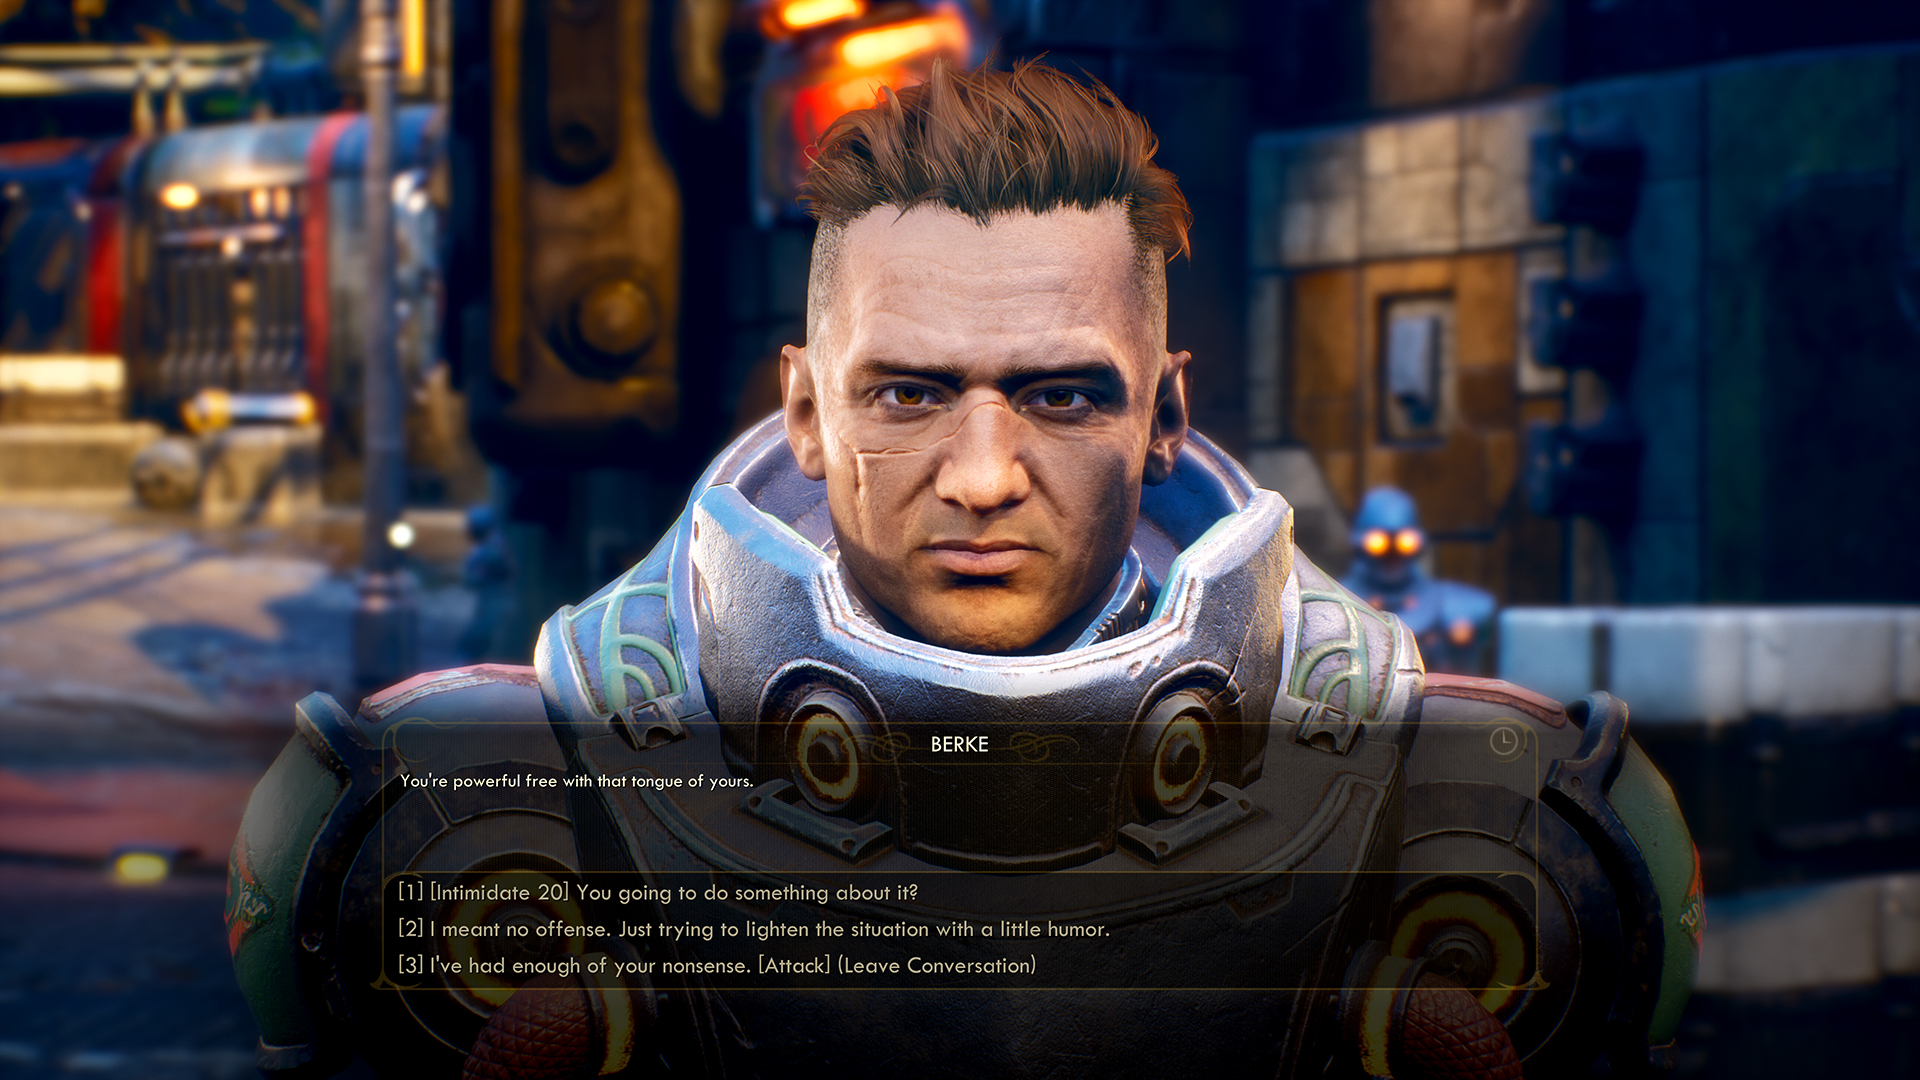 The Outer Worlds system requirements: What you need to play on PC